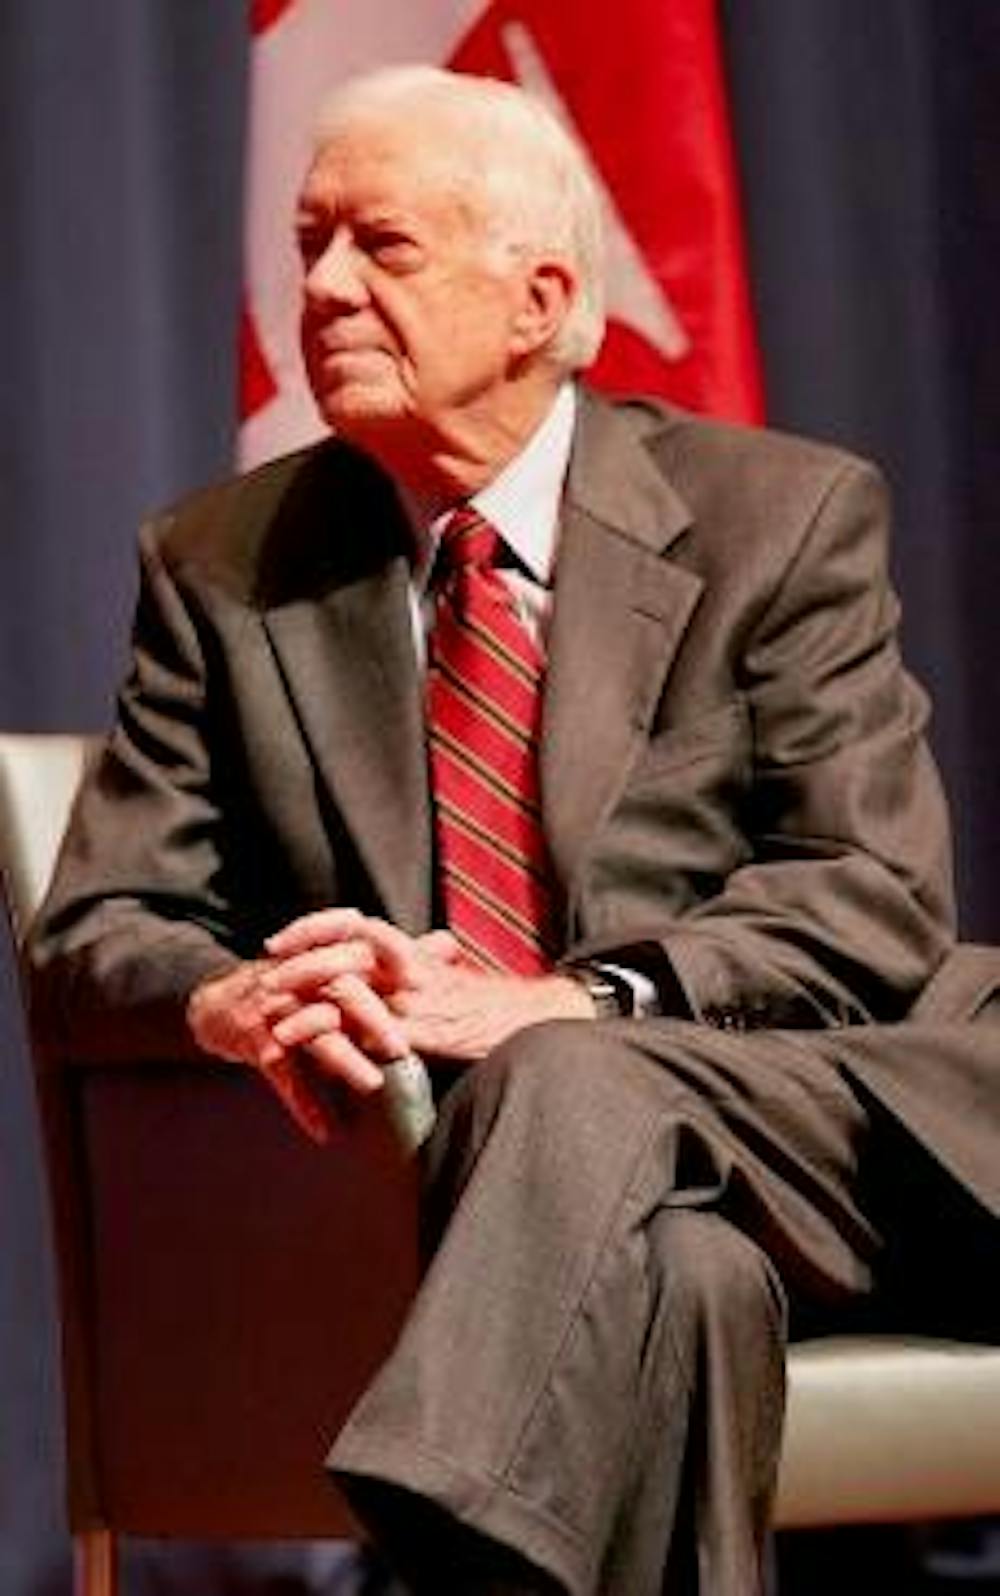 DARFUR DISCUSSION - Jimmy Carter speaks to students and community members in the Abramson Family Recital Hall in Katzen Art Center Wednesday. Although tickets were gone within minuets after the event was announced, there was still a handful of empty seats